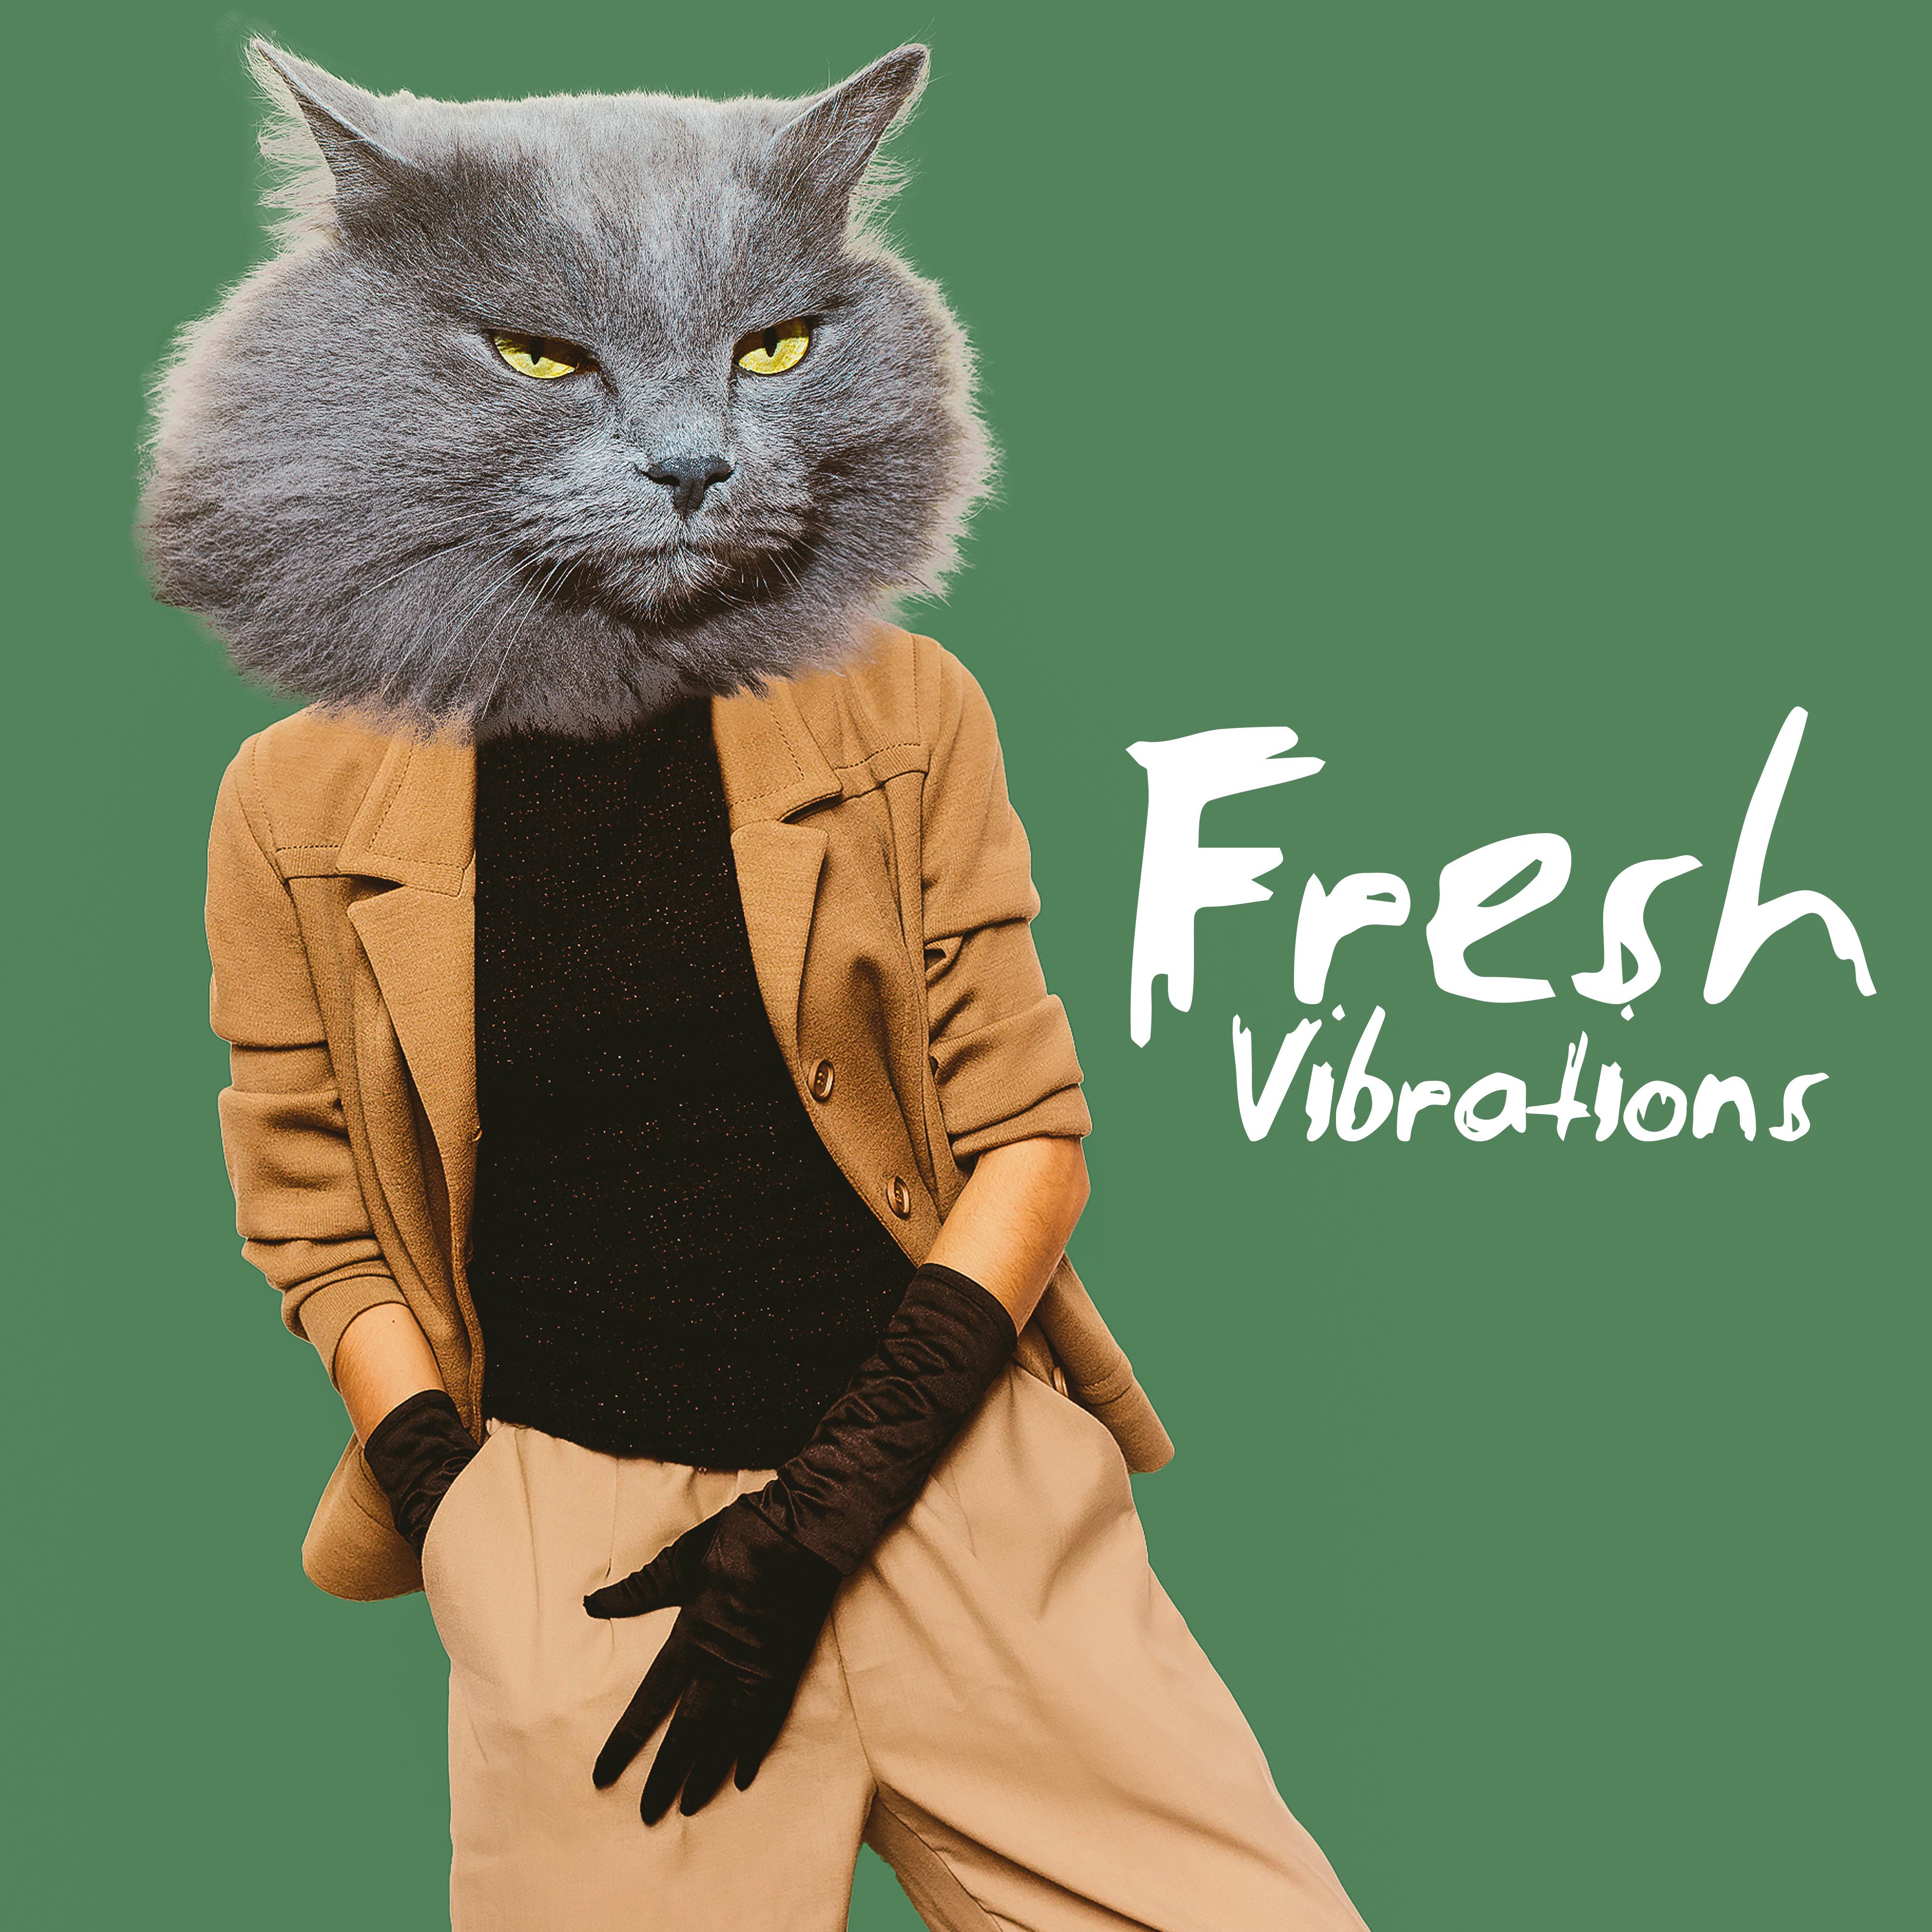 Fresh Vibrations – Summertime 2019, Relaxing Melodies to Rest, Sunny Break, Sunshine Lounge, Chillout Bar, Ibiza Relaxation